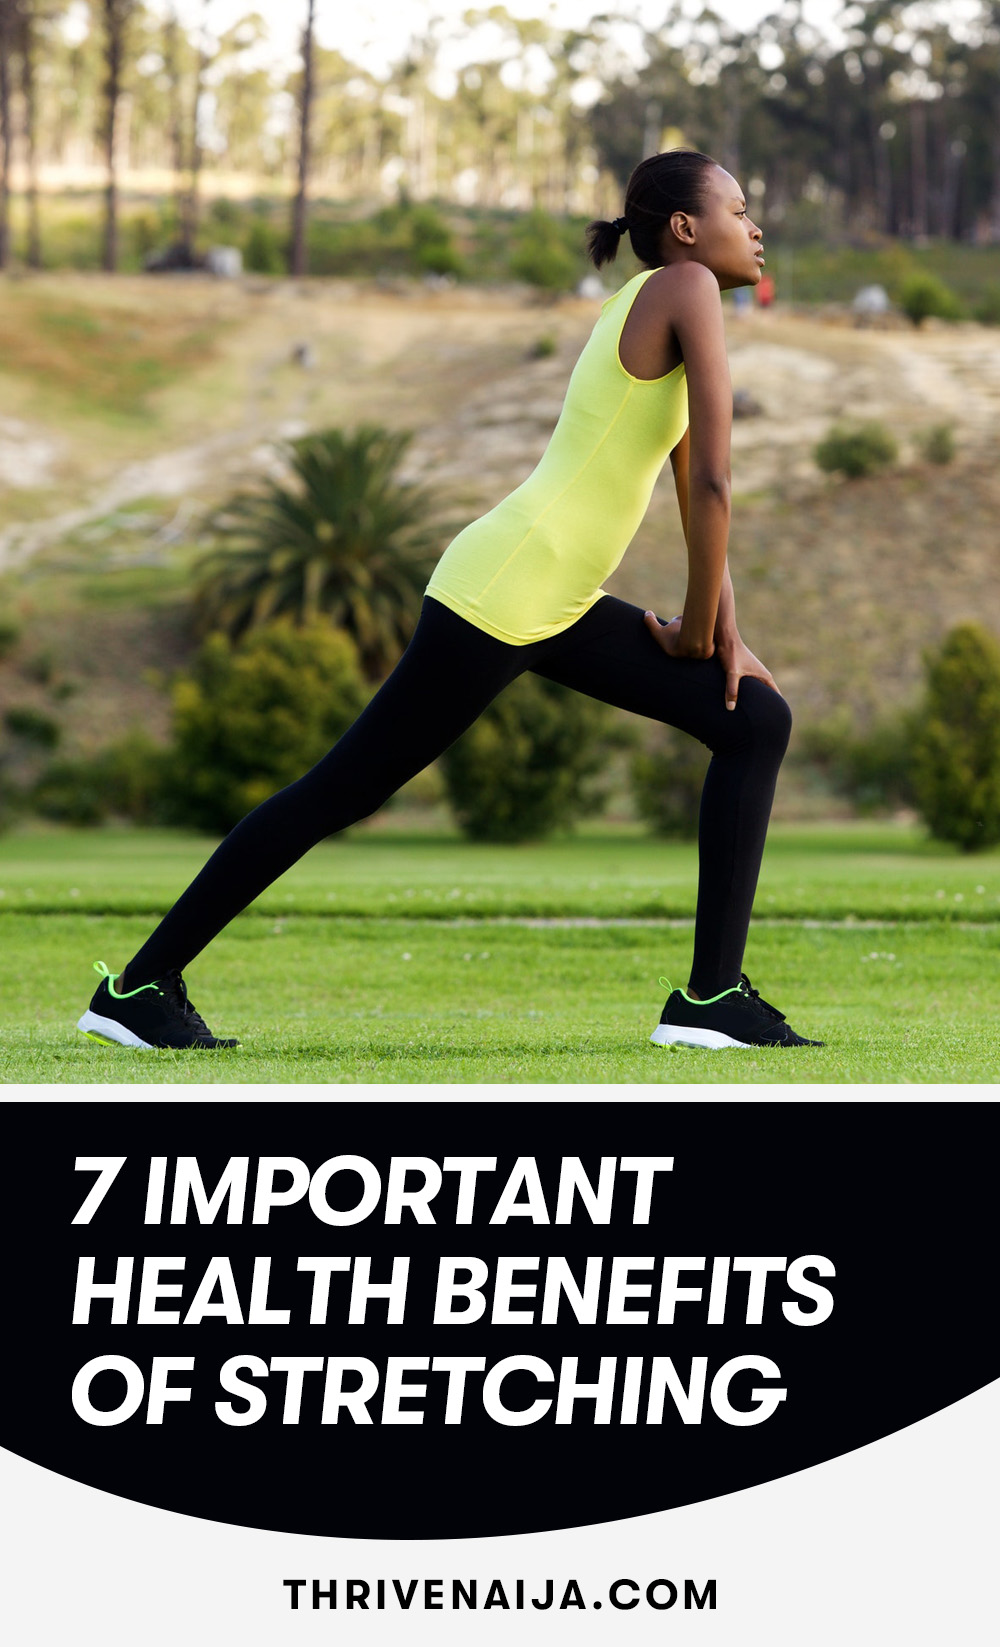  7 Important Health Benefits Of Stretching